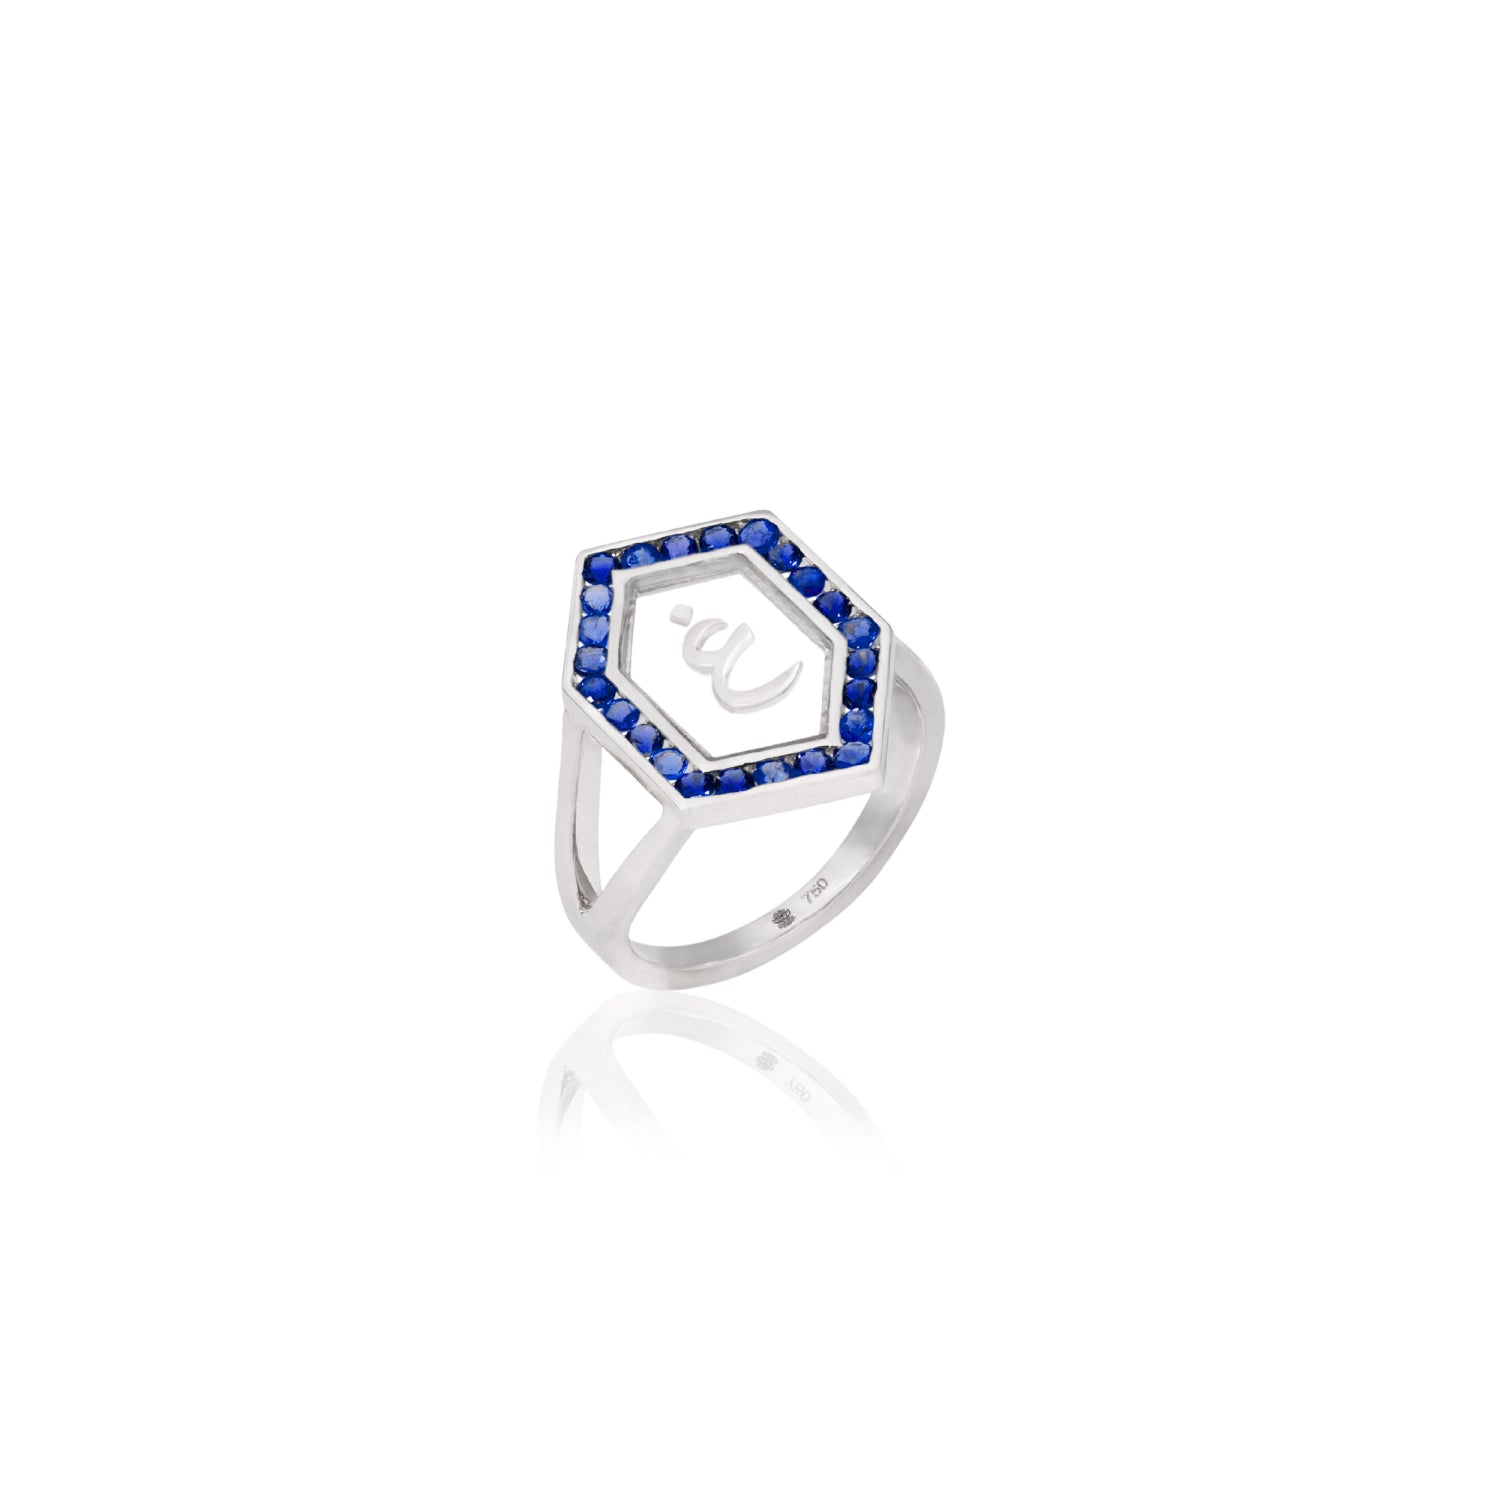 Qamoos 1.0 Letter غ Sapphire Ring in White Gold